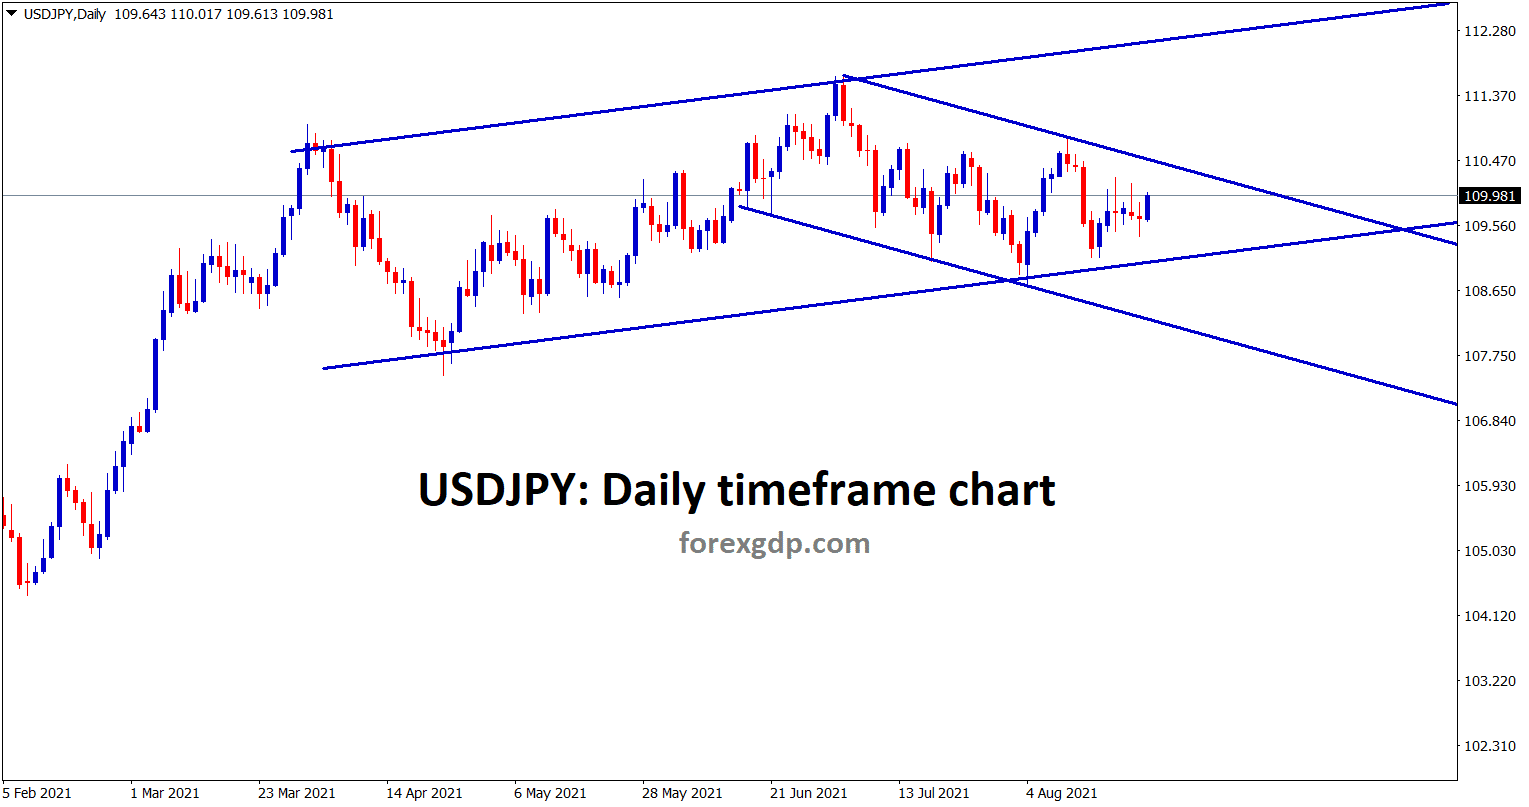 USDJPY is still moving between the channel ranges for a long time